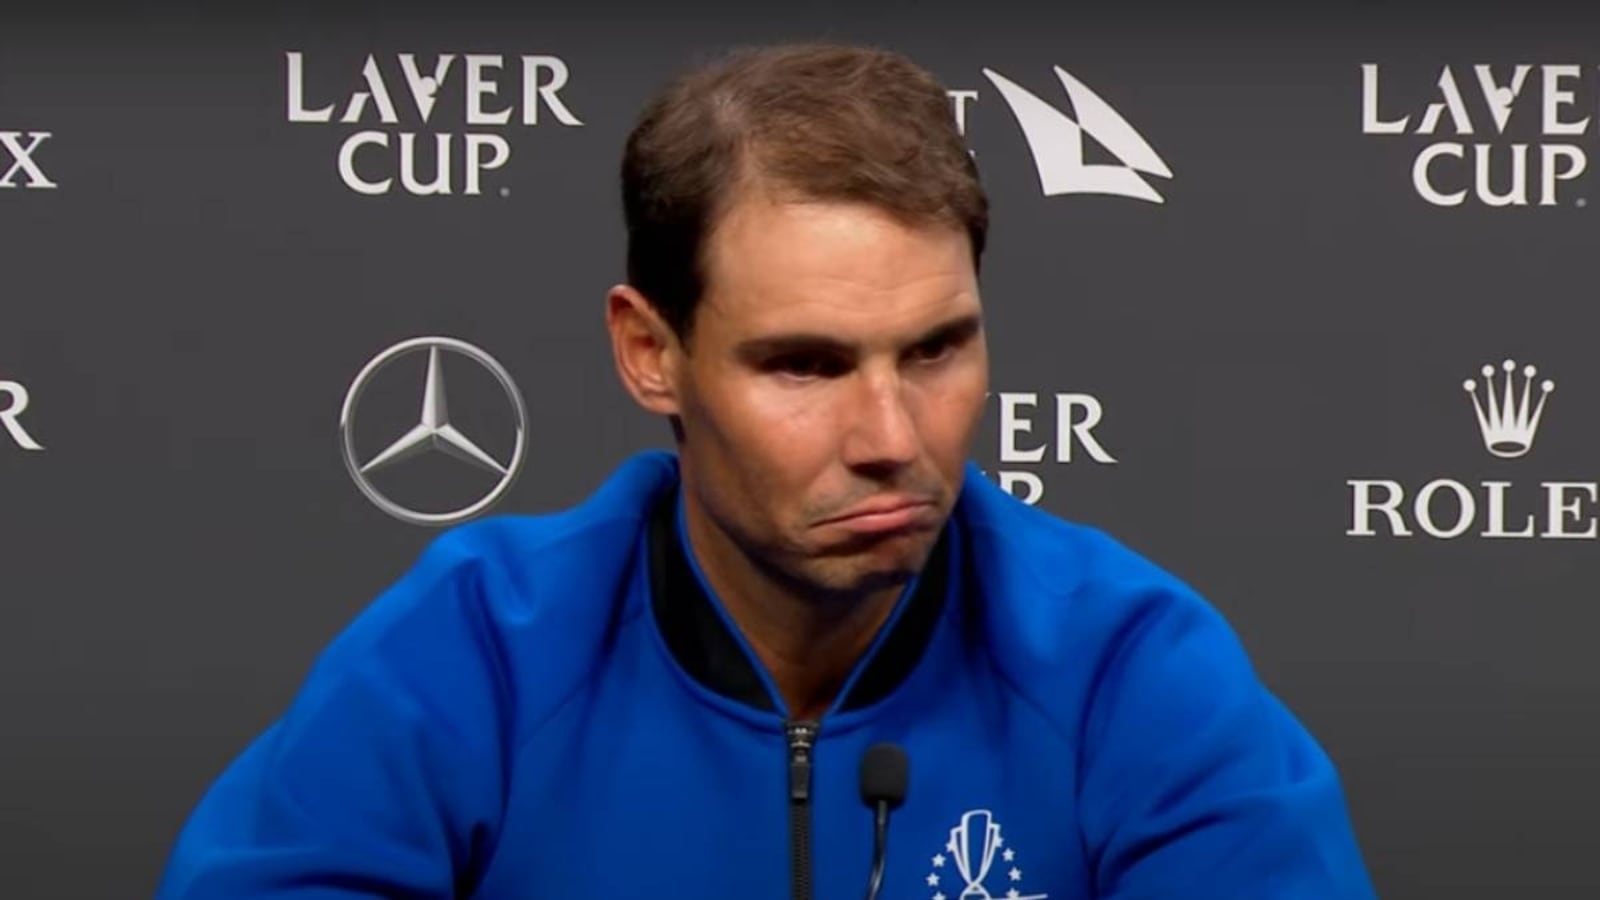 Nadal makes shocking retirement admission post Federer farewell: ‘At Roland Garros I felt it might be my last event’